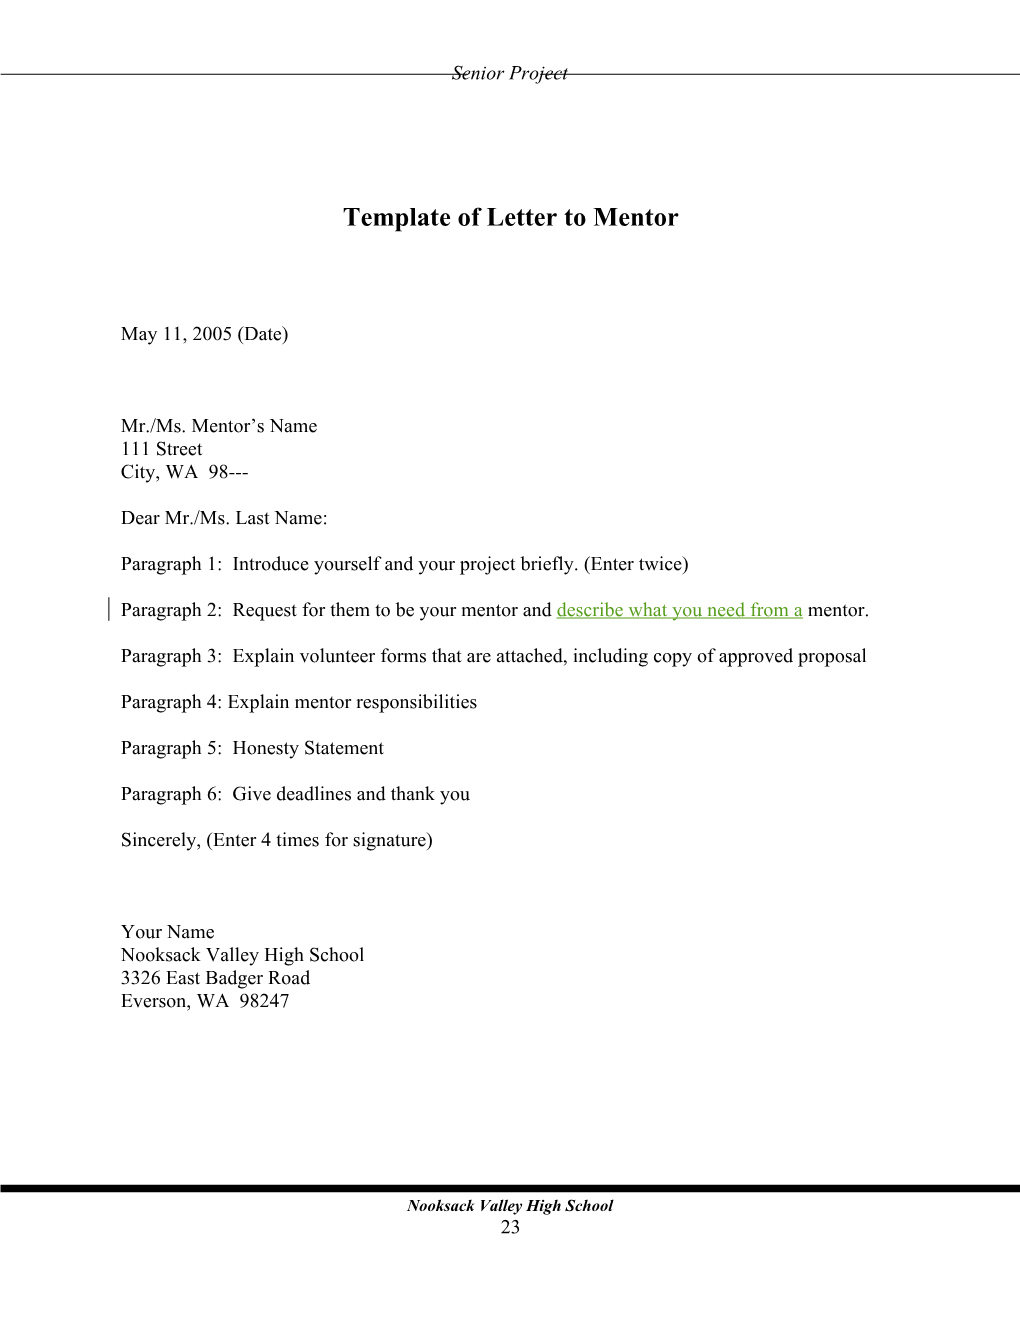 Template of Letter to Mentor